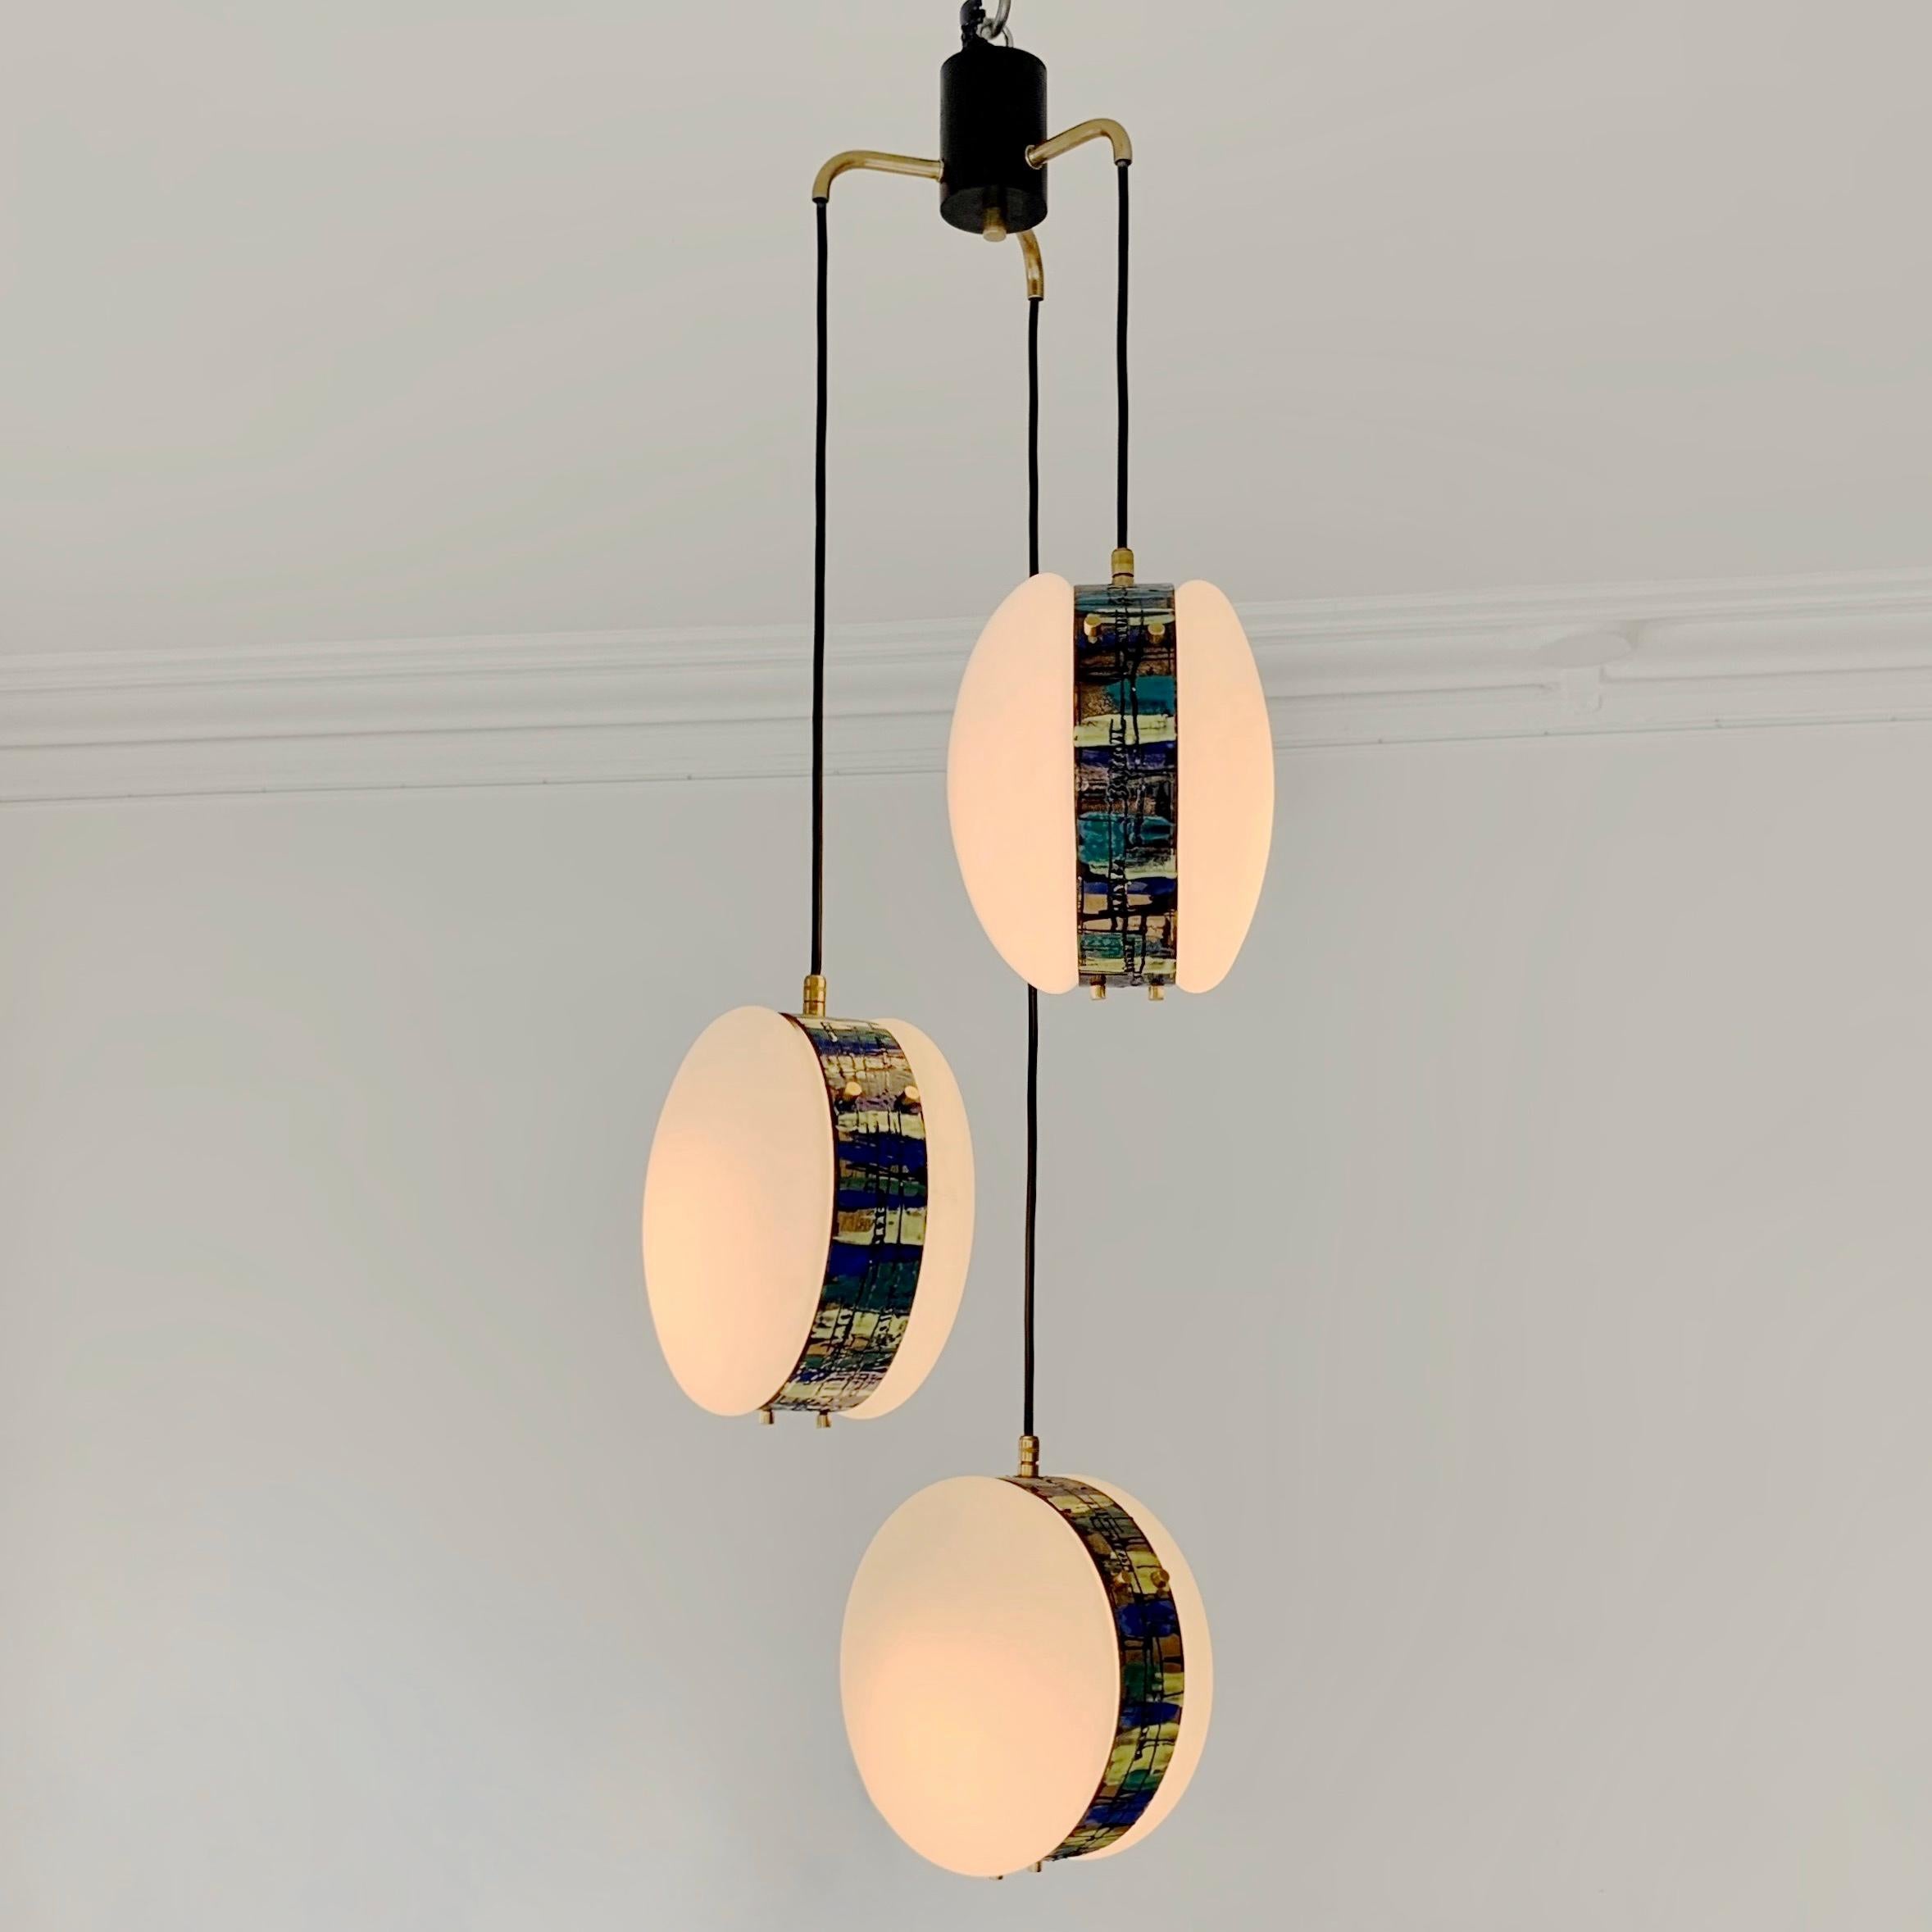 Rare Angelo Brotto 3-lights chandelier for Esperia, circa 1960, Italy.
Each pendant made of two parts of opaline glass attached by a metal circle with an enamelled hand-crafted abstract multi-colored decor, brass decoratives screws and details,